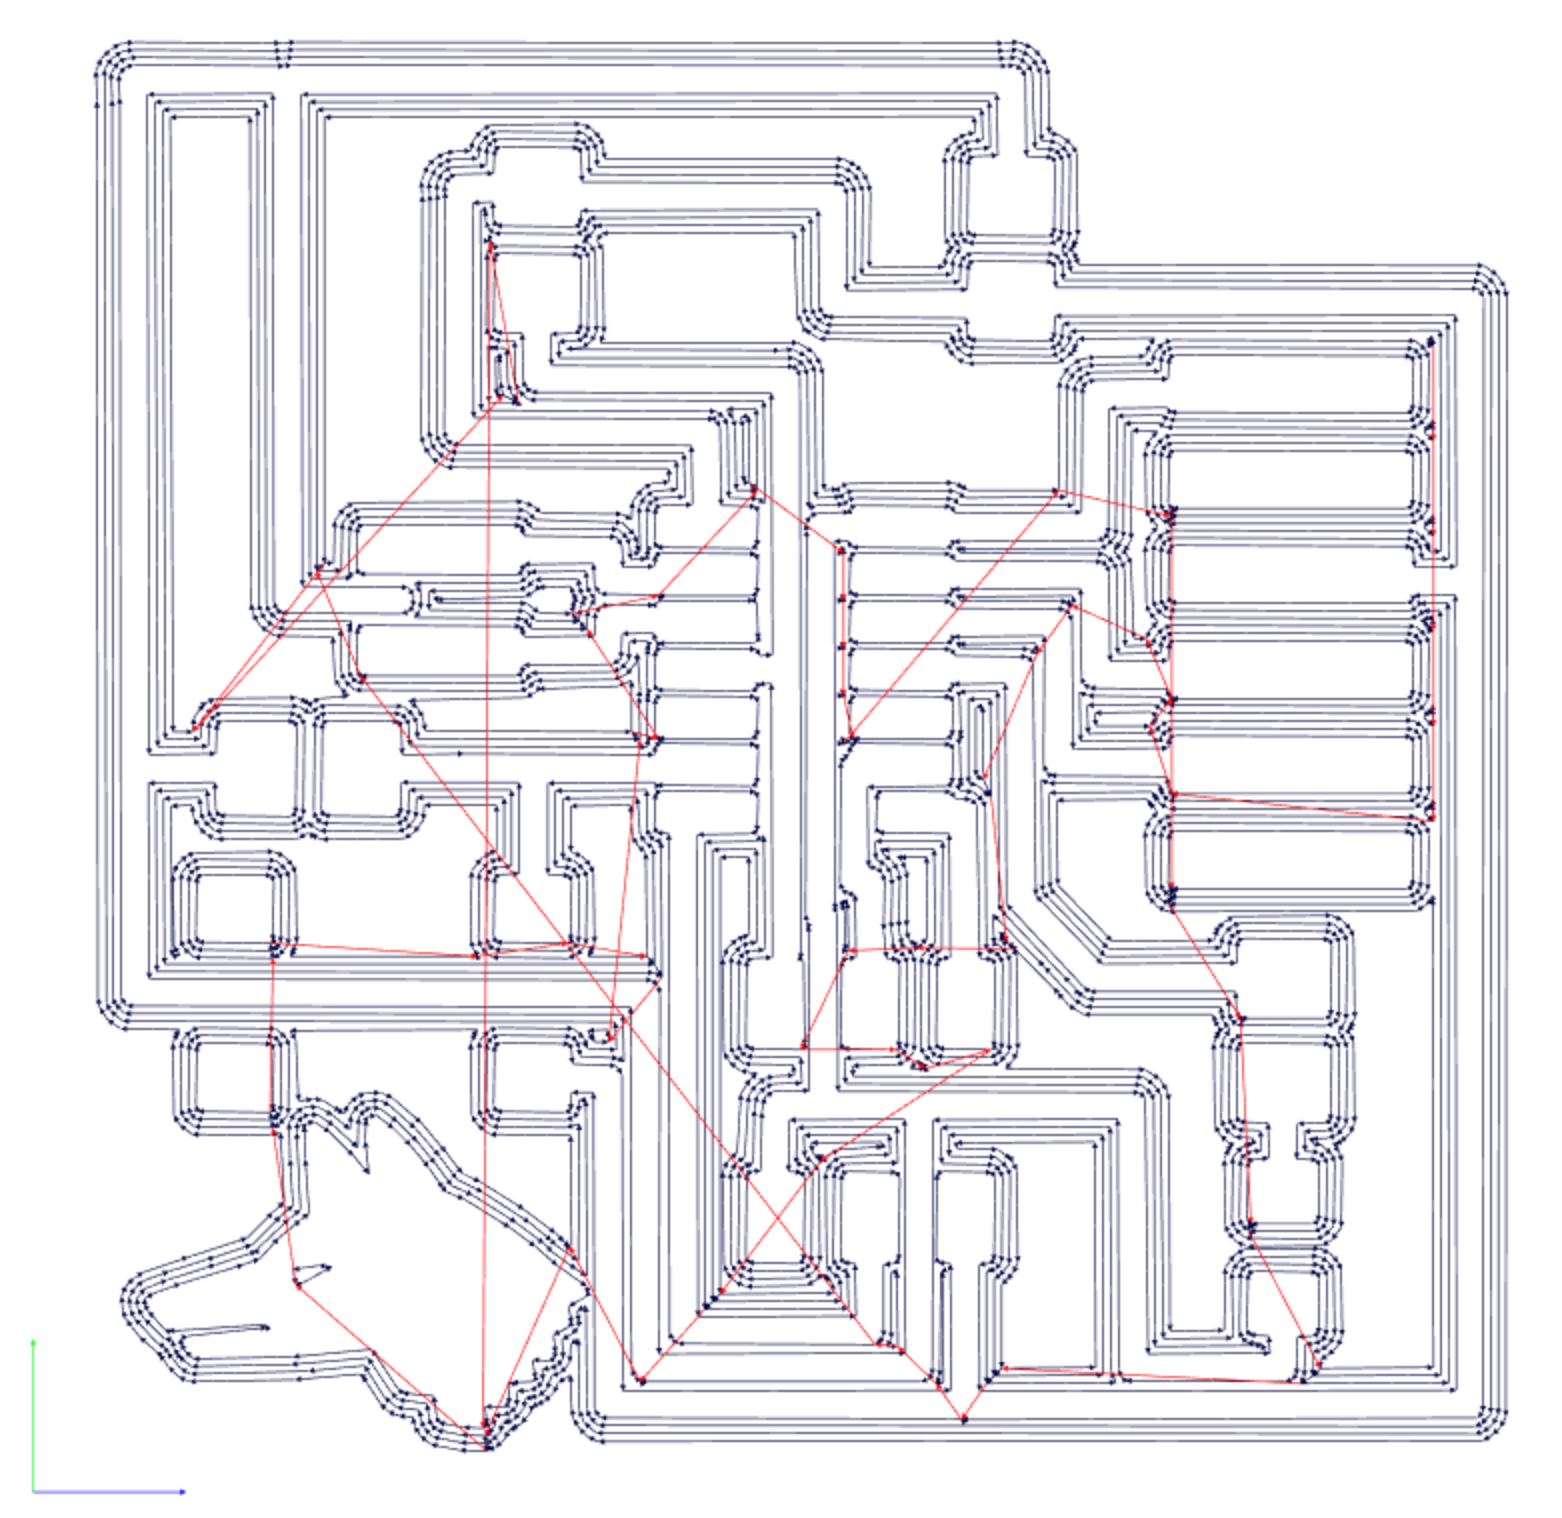 cutting-path-board-new-switch.png